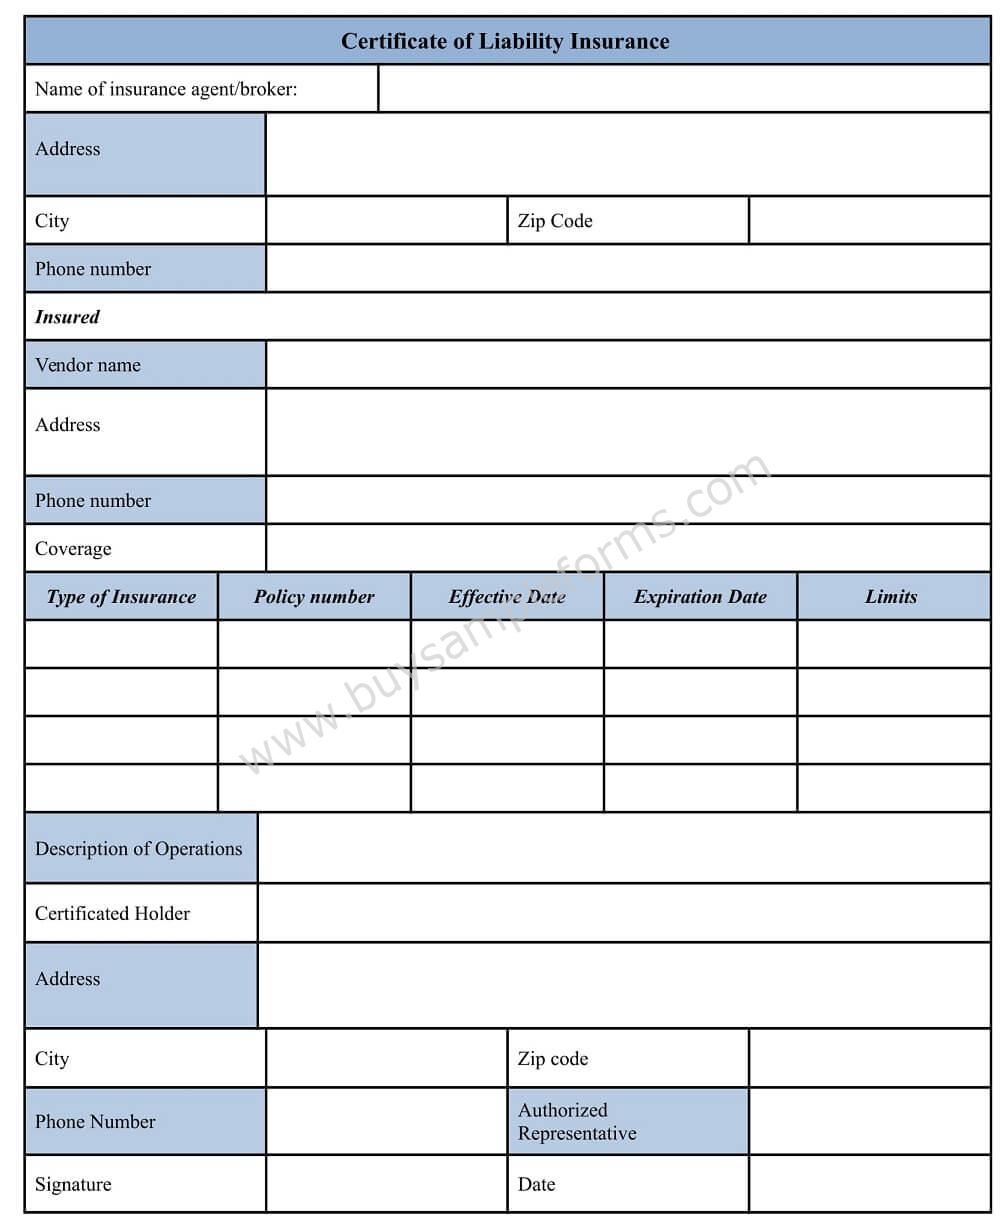 Download Certificate of Liability Insurance Form Template Doc | Sample ...